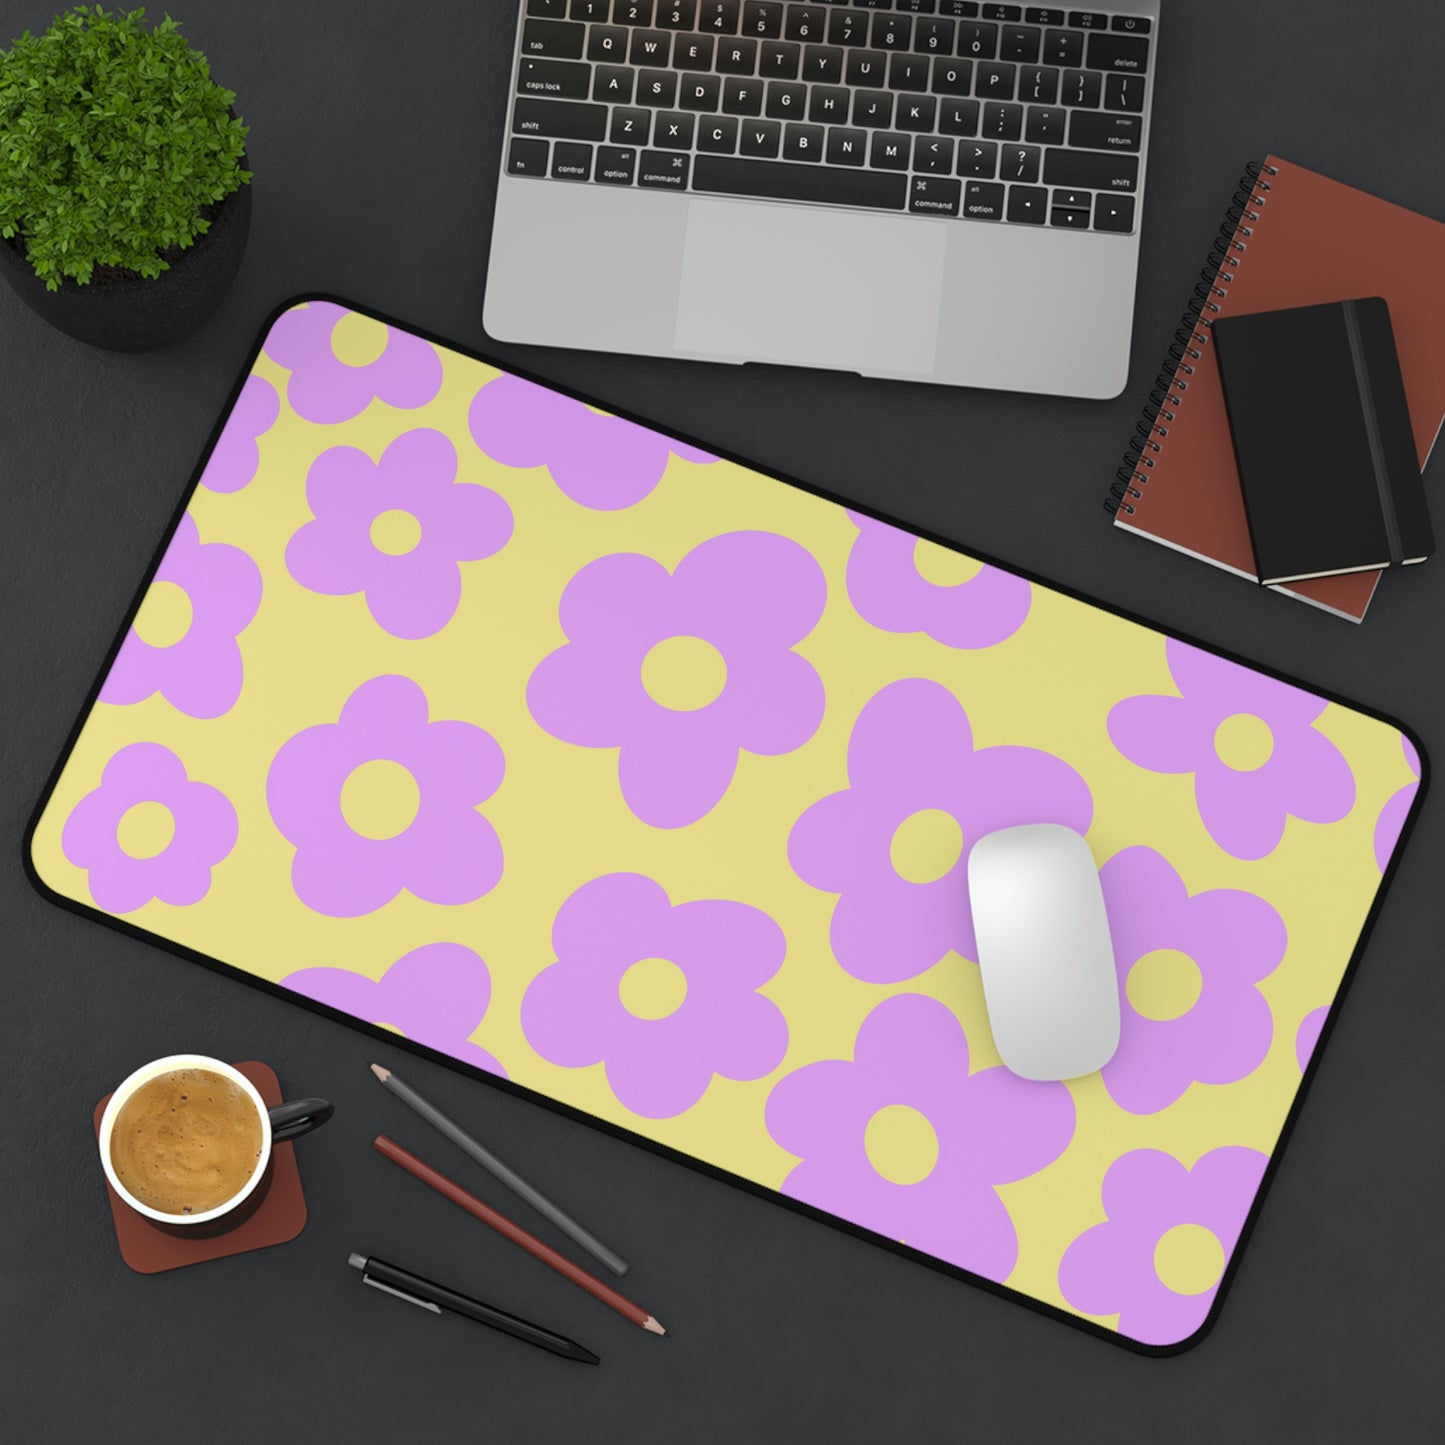 A 12" x 22" desk mat with purple flowers on a yellow background sitting at an angle.